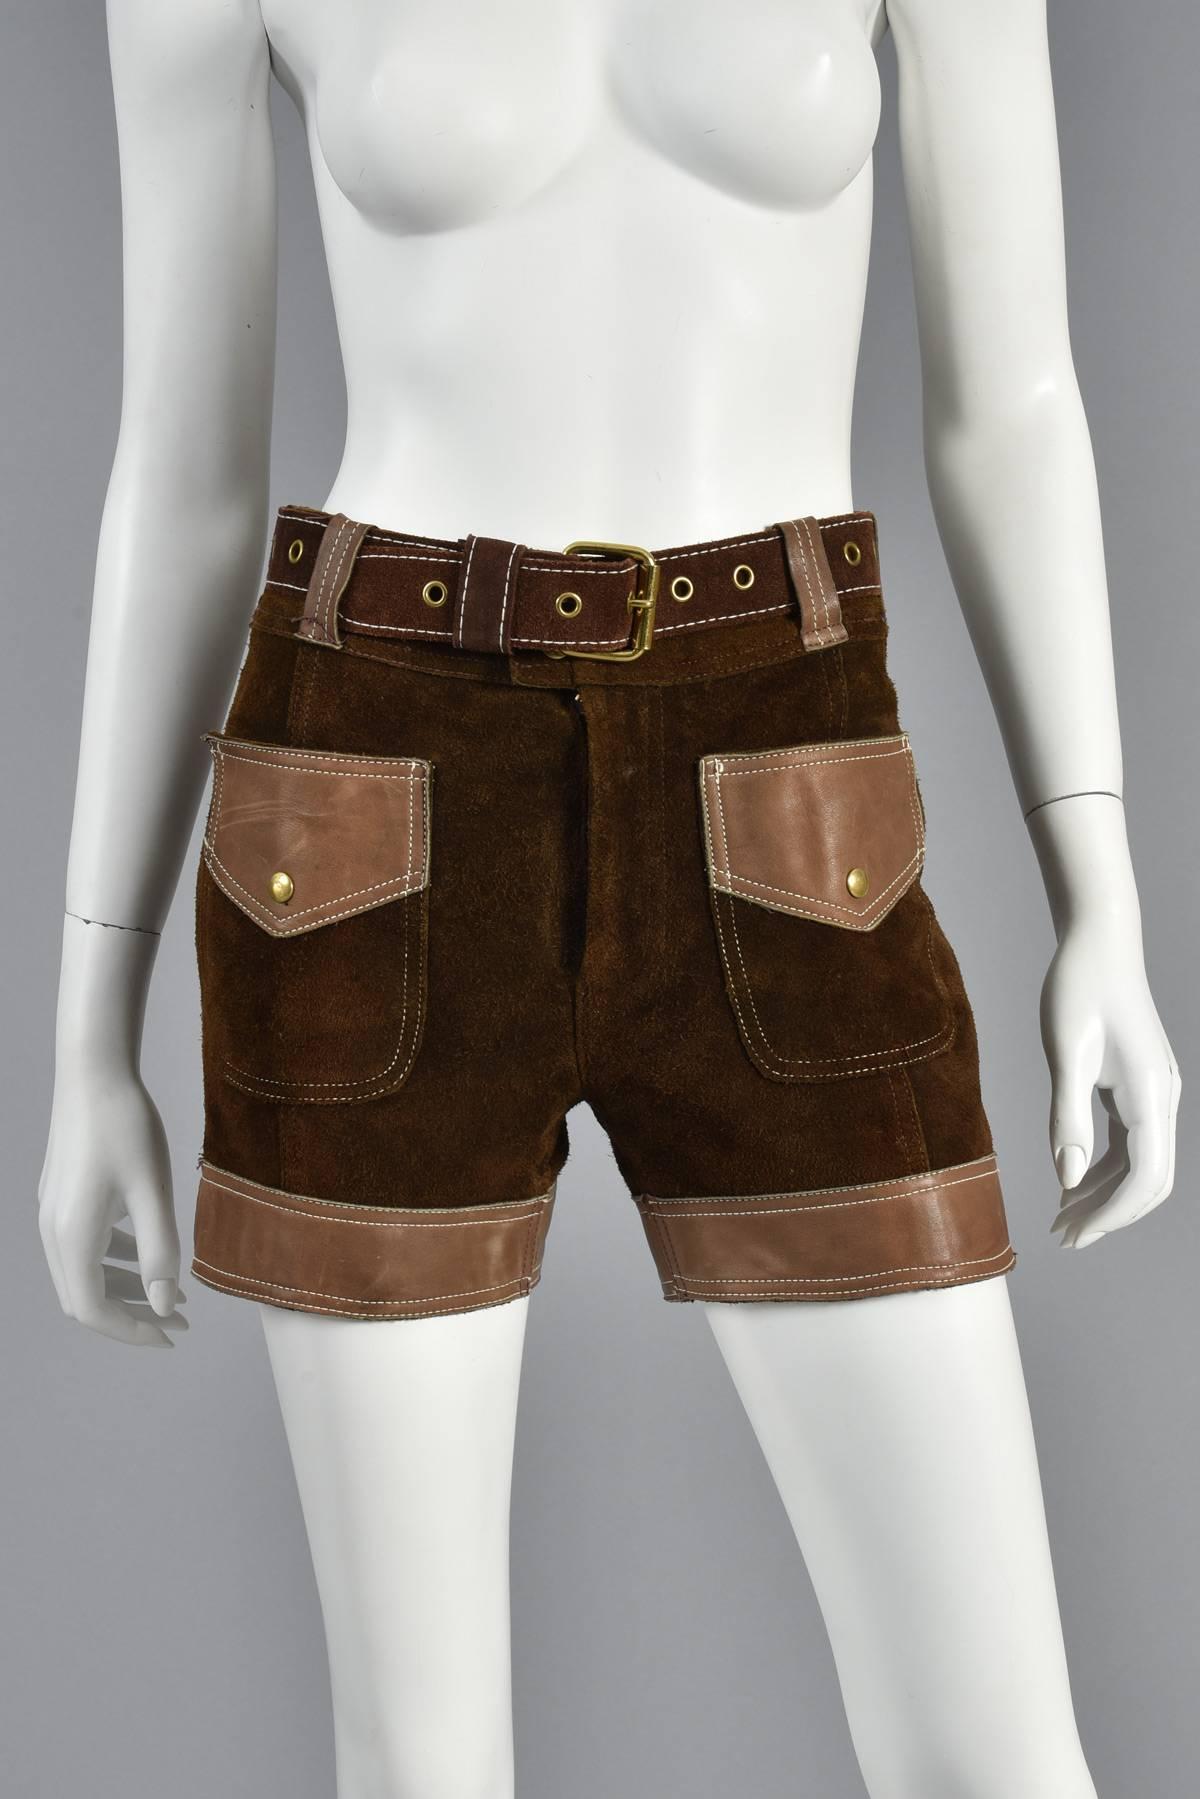 Classic vintage 60s/70s two-tone leather and suede high waisted shorts from Saks 5th Ave. Rich cocoa colored suede with toasted caramel colored leather pockets and trim. Sure to become a staple in any 1960’s loving gal’s wardrobe. Also includes the